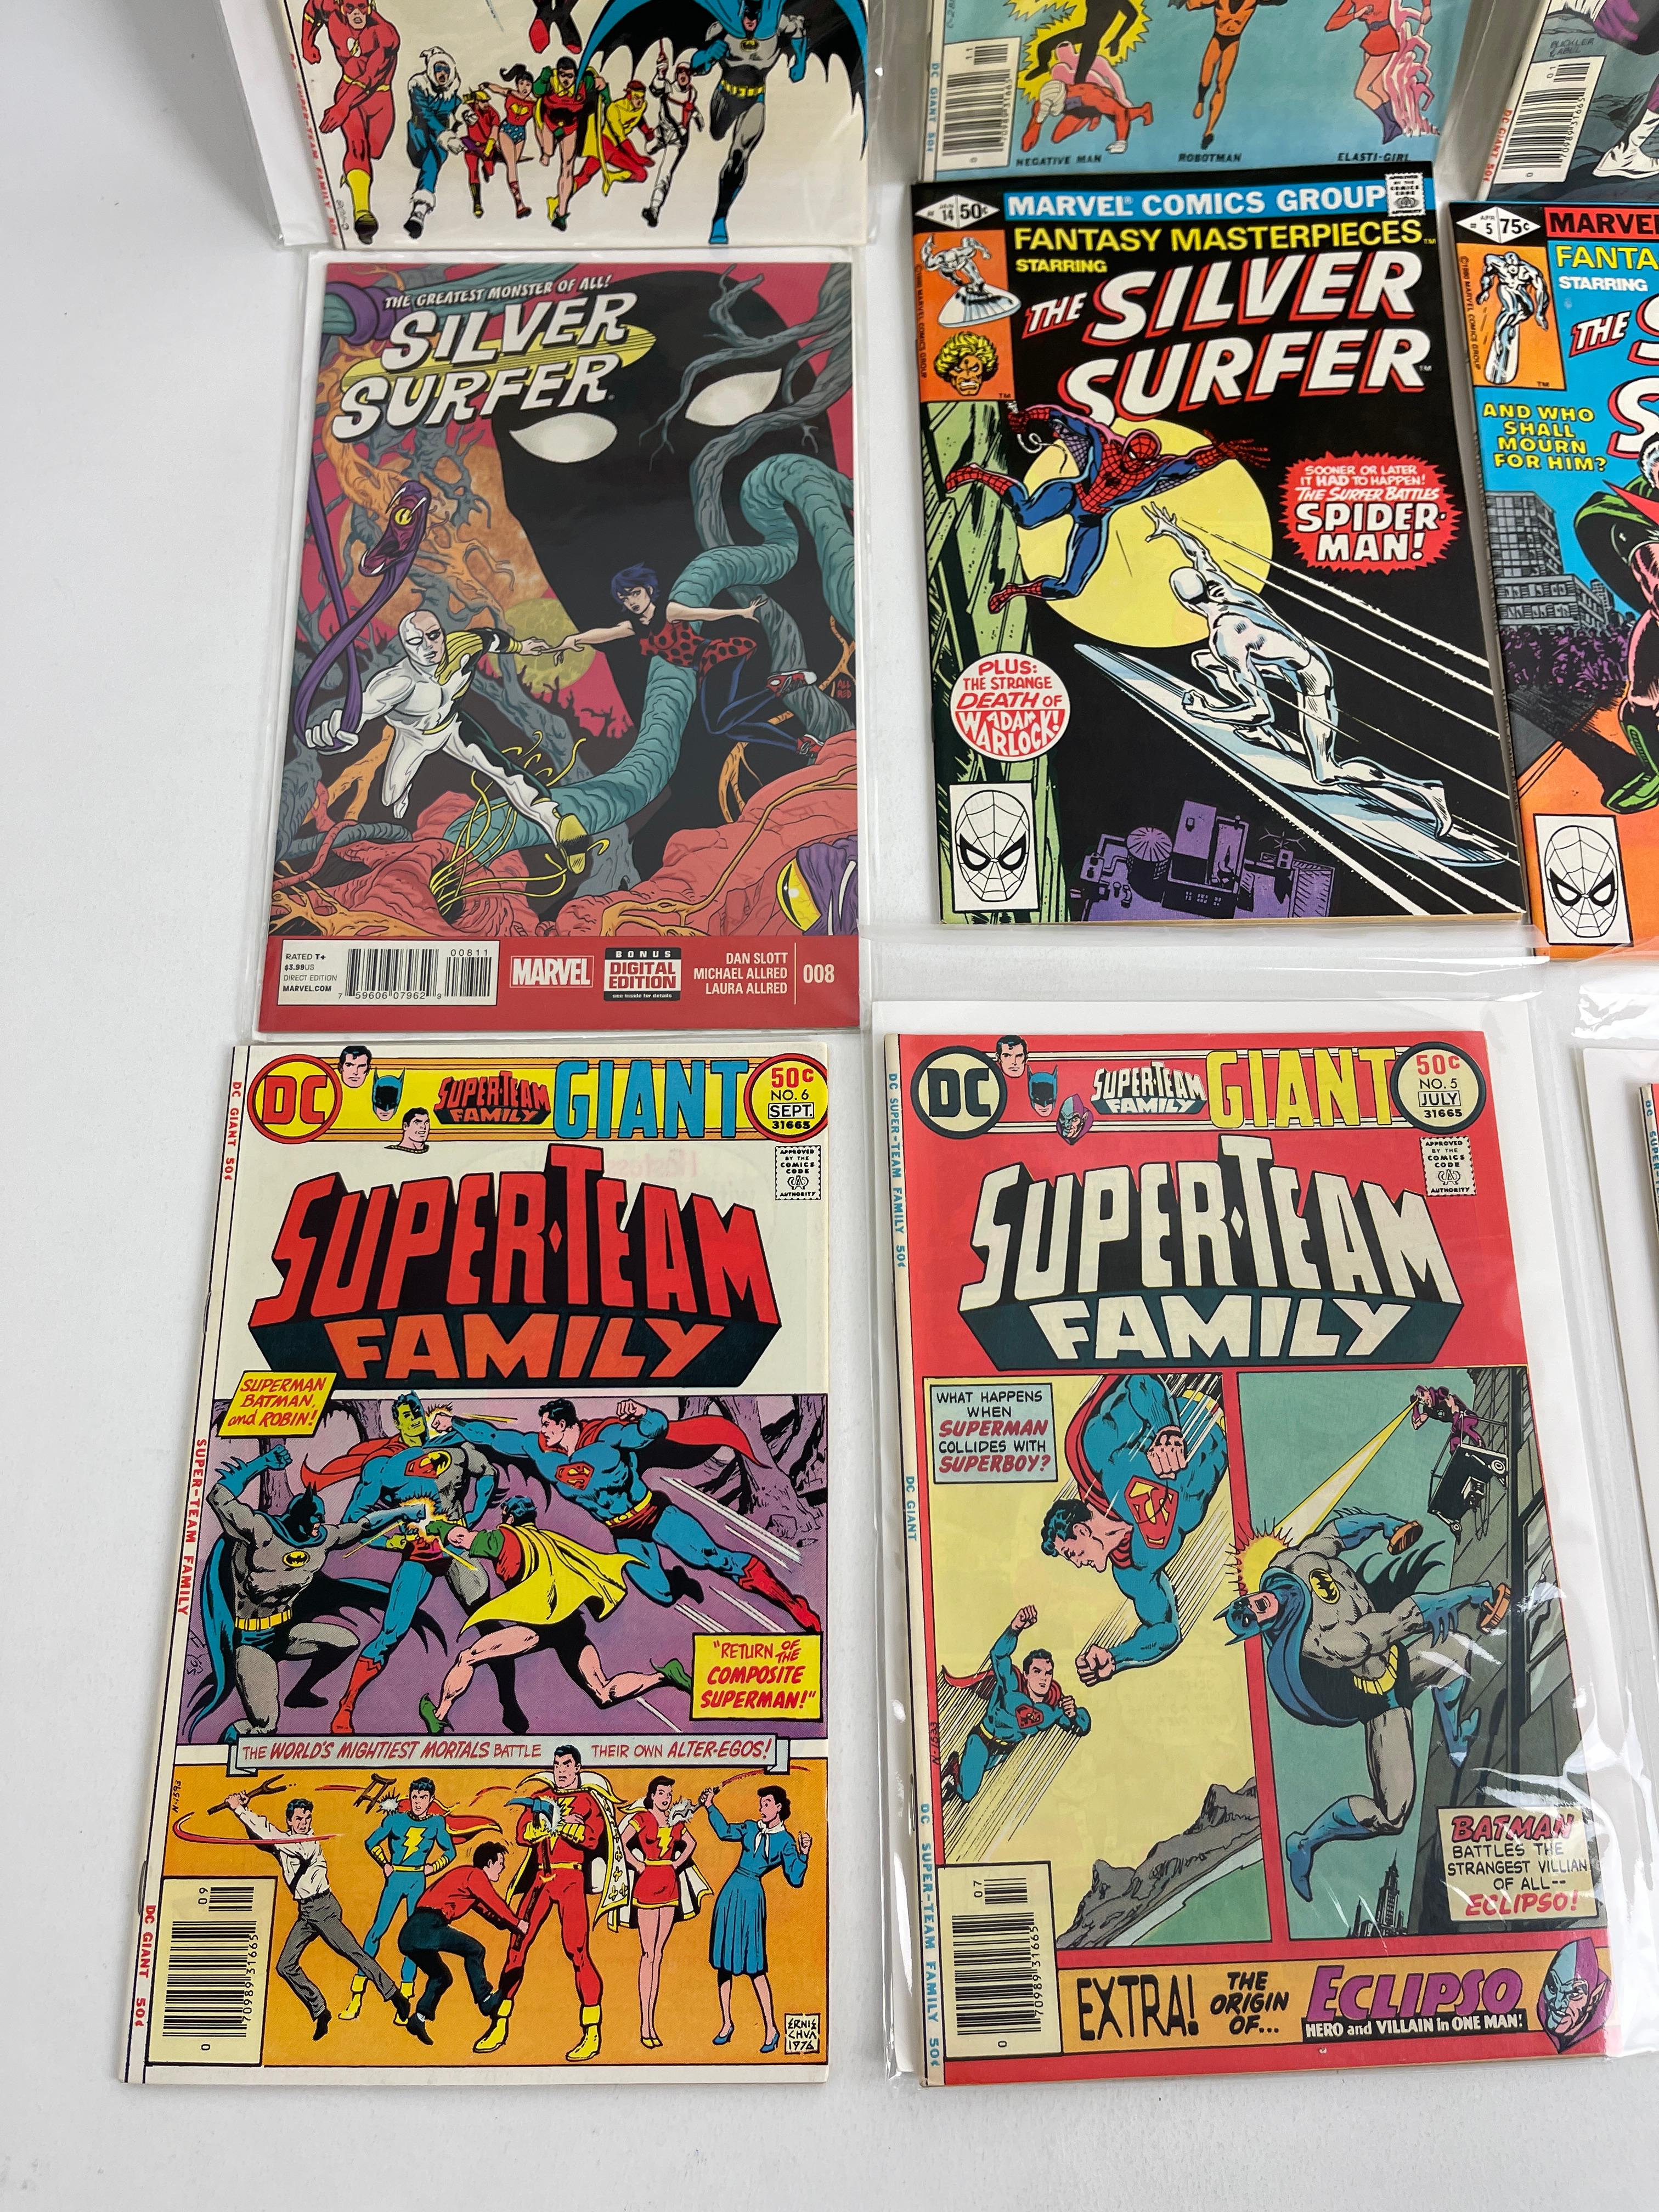 Silver Surfer and Super Team Family Mixed Marvel DC Comic Book Collection Lot 9